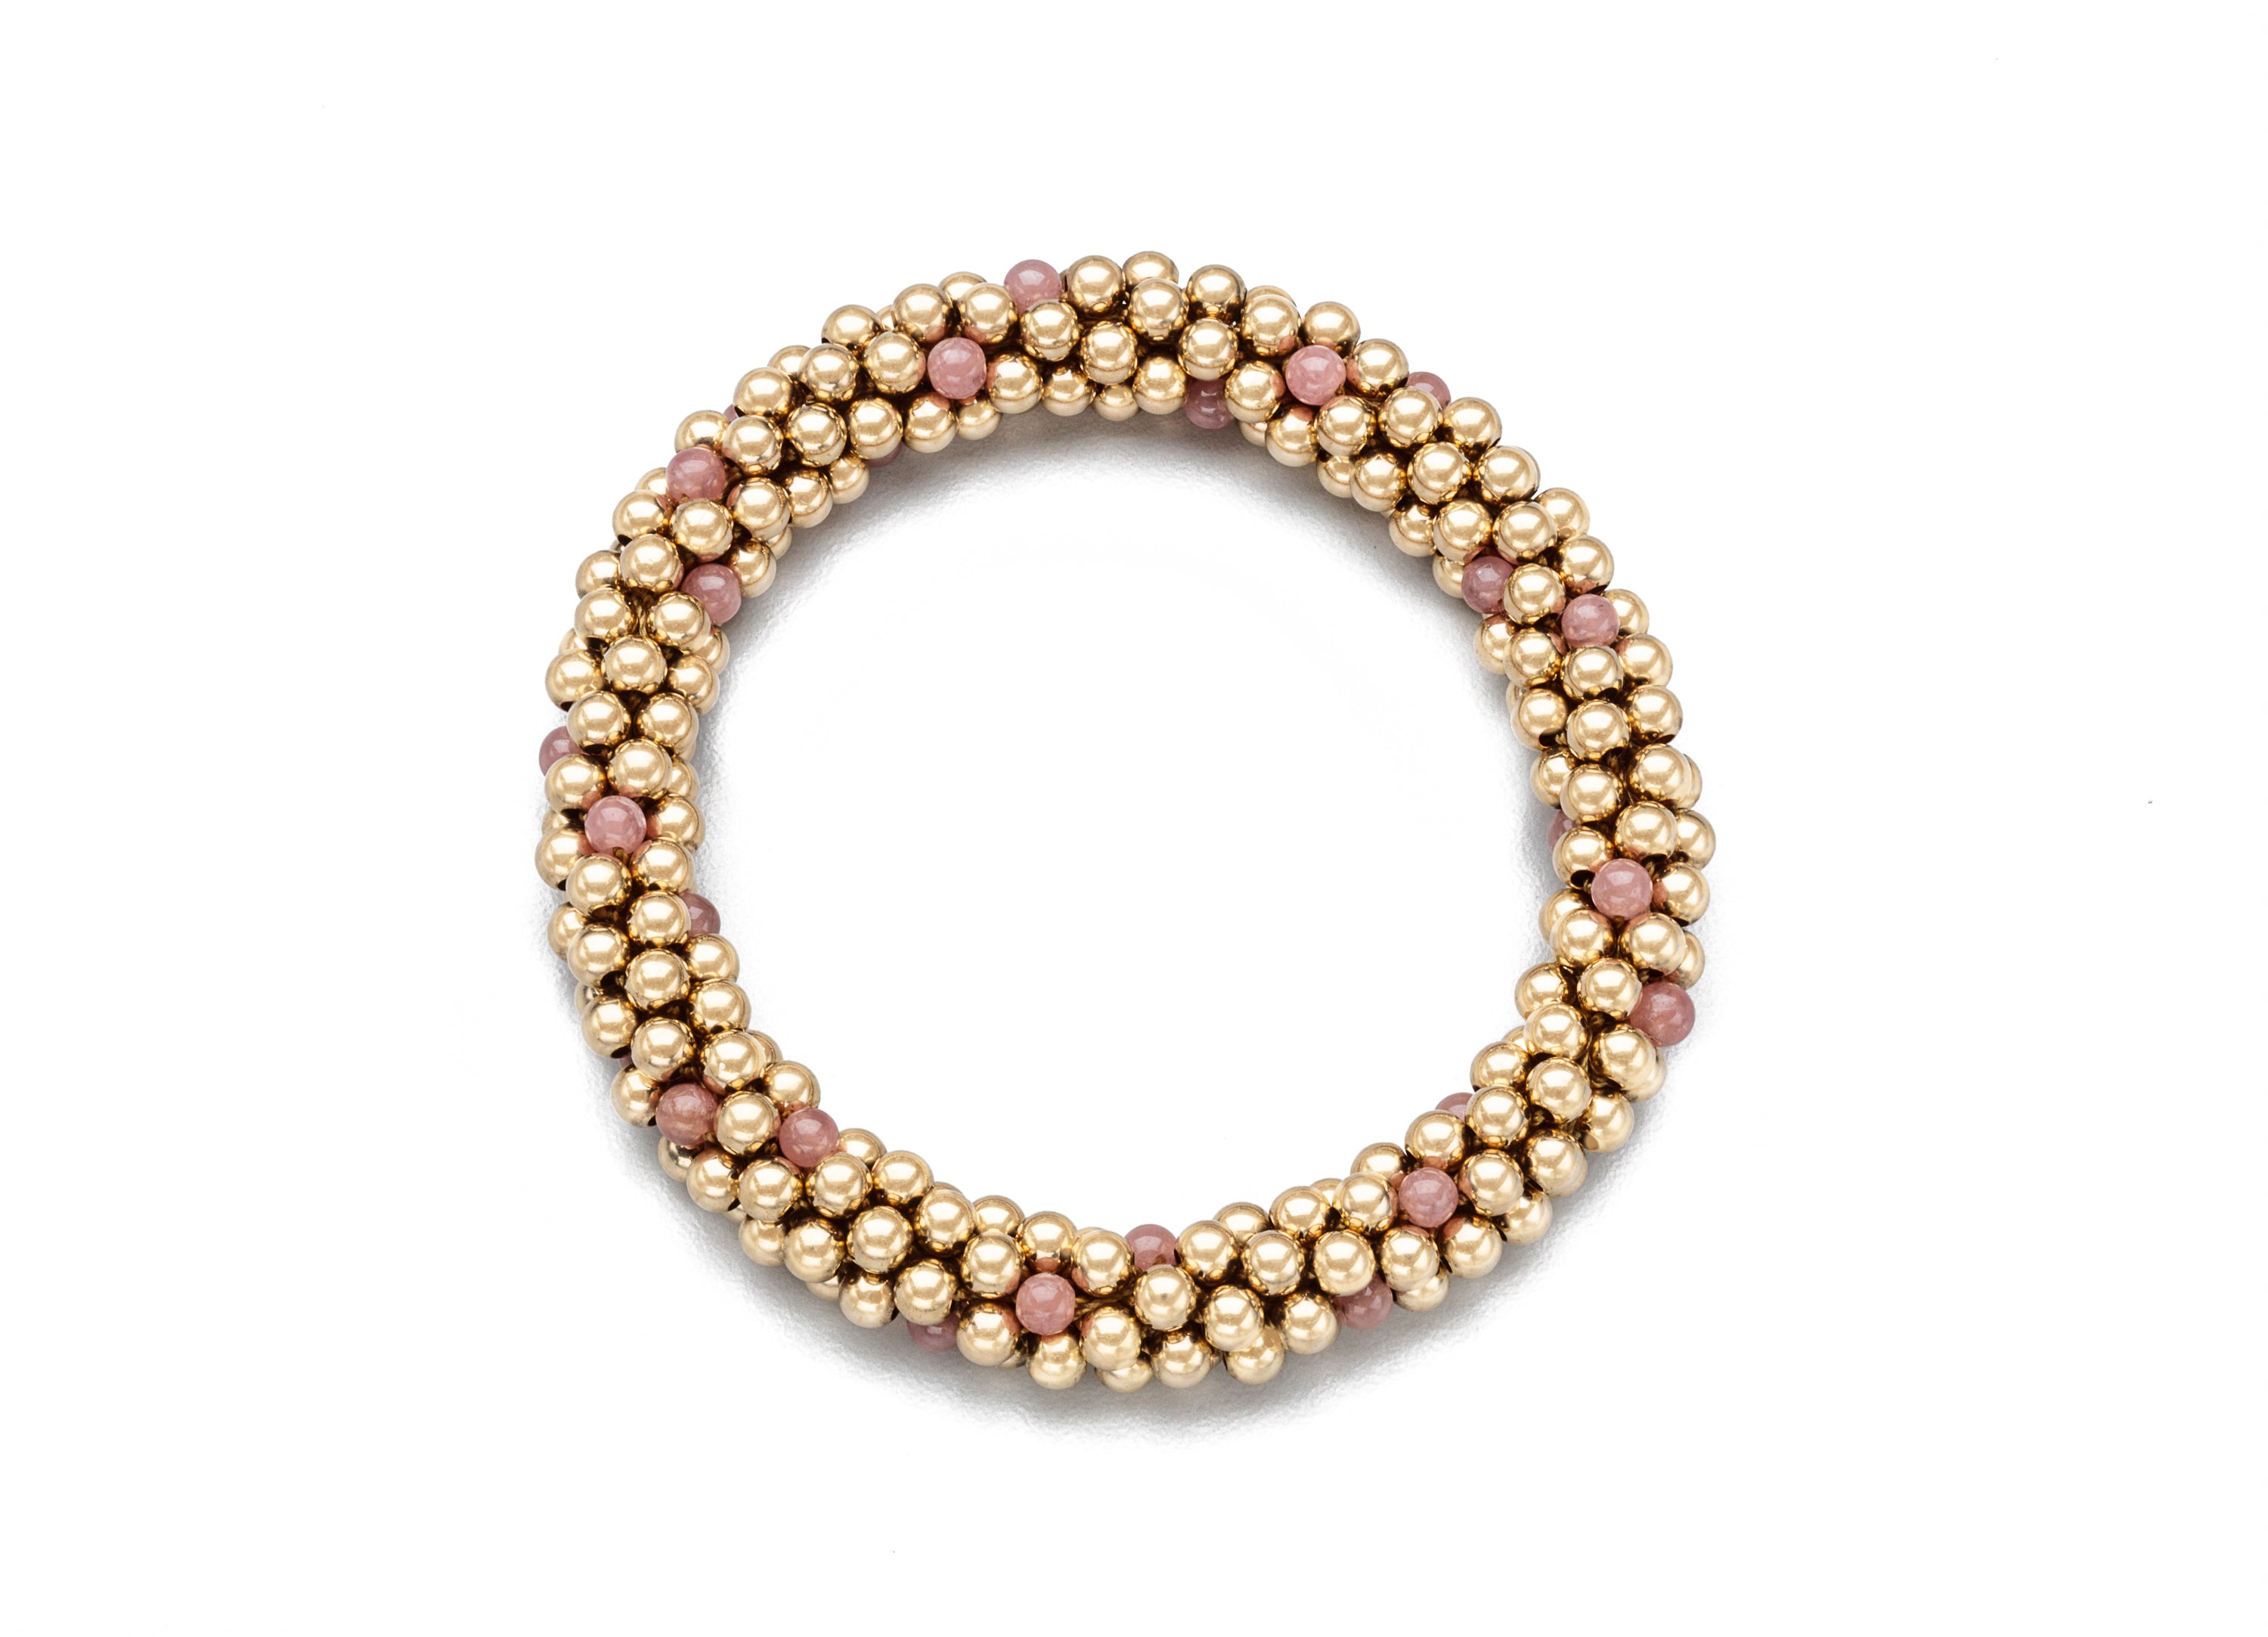 4mm Cluster Bracelets, Gold and Semiprecious Accents (Click to View All)